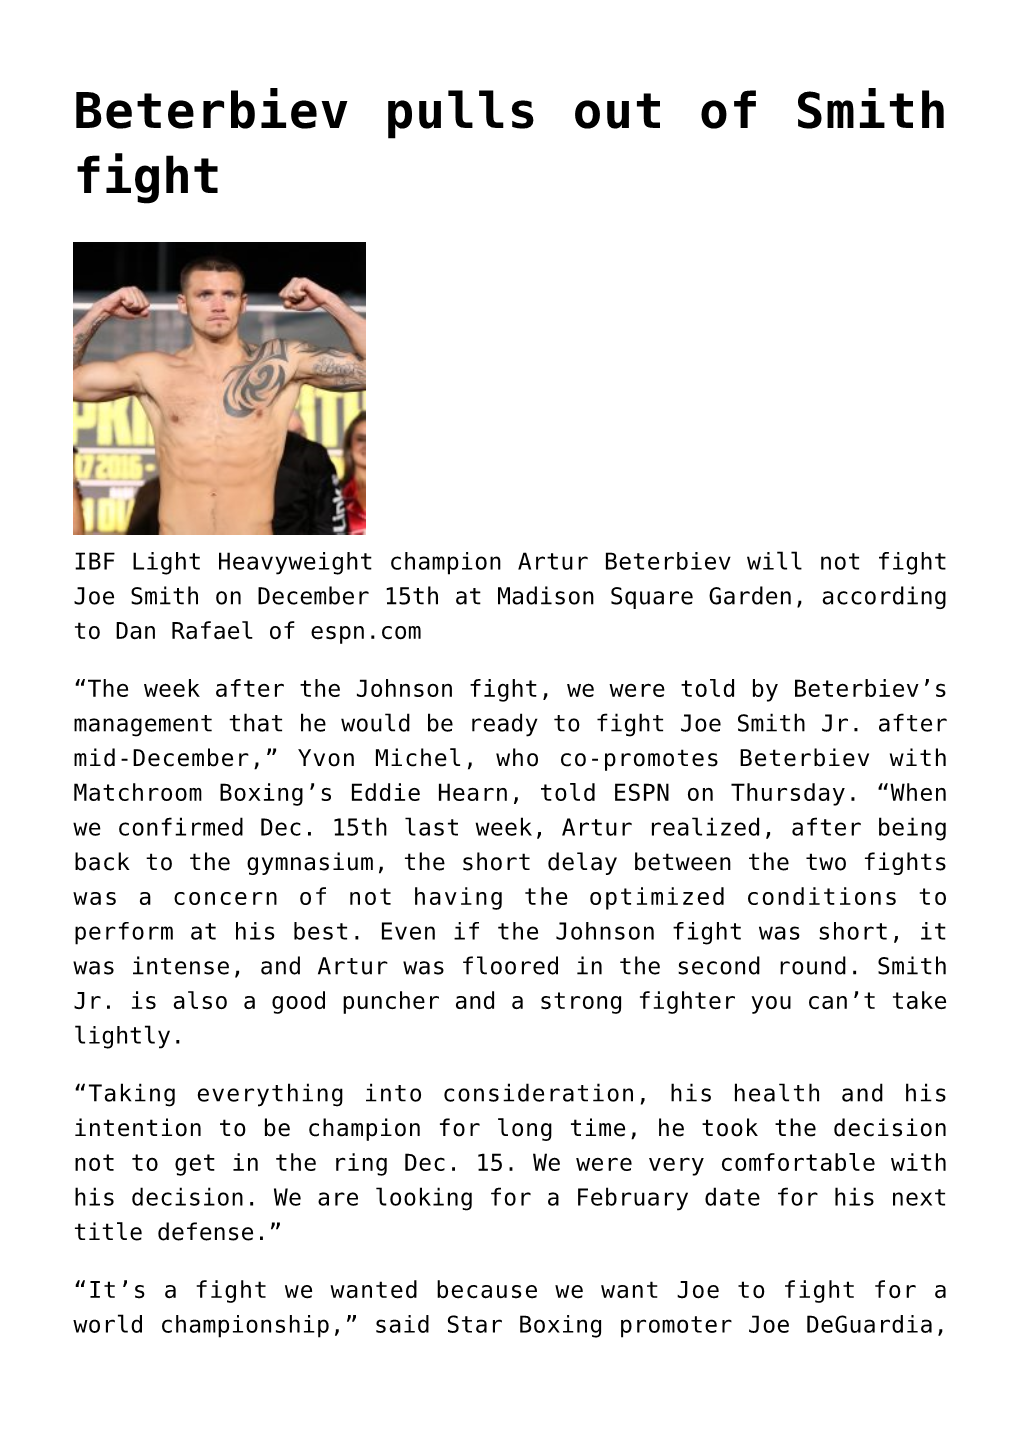 Beterbiev Pulls out of Smith Fight